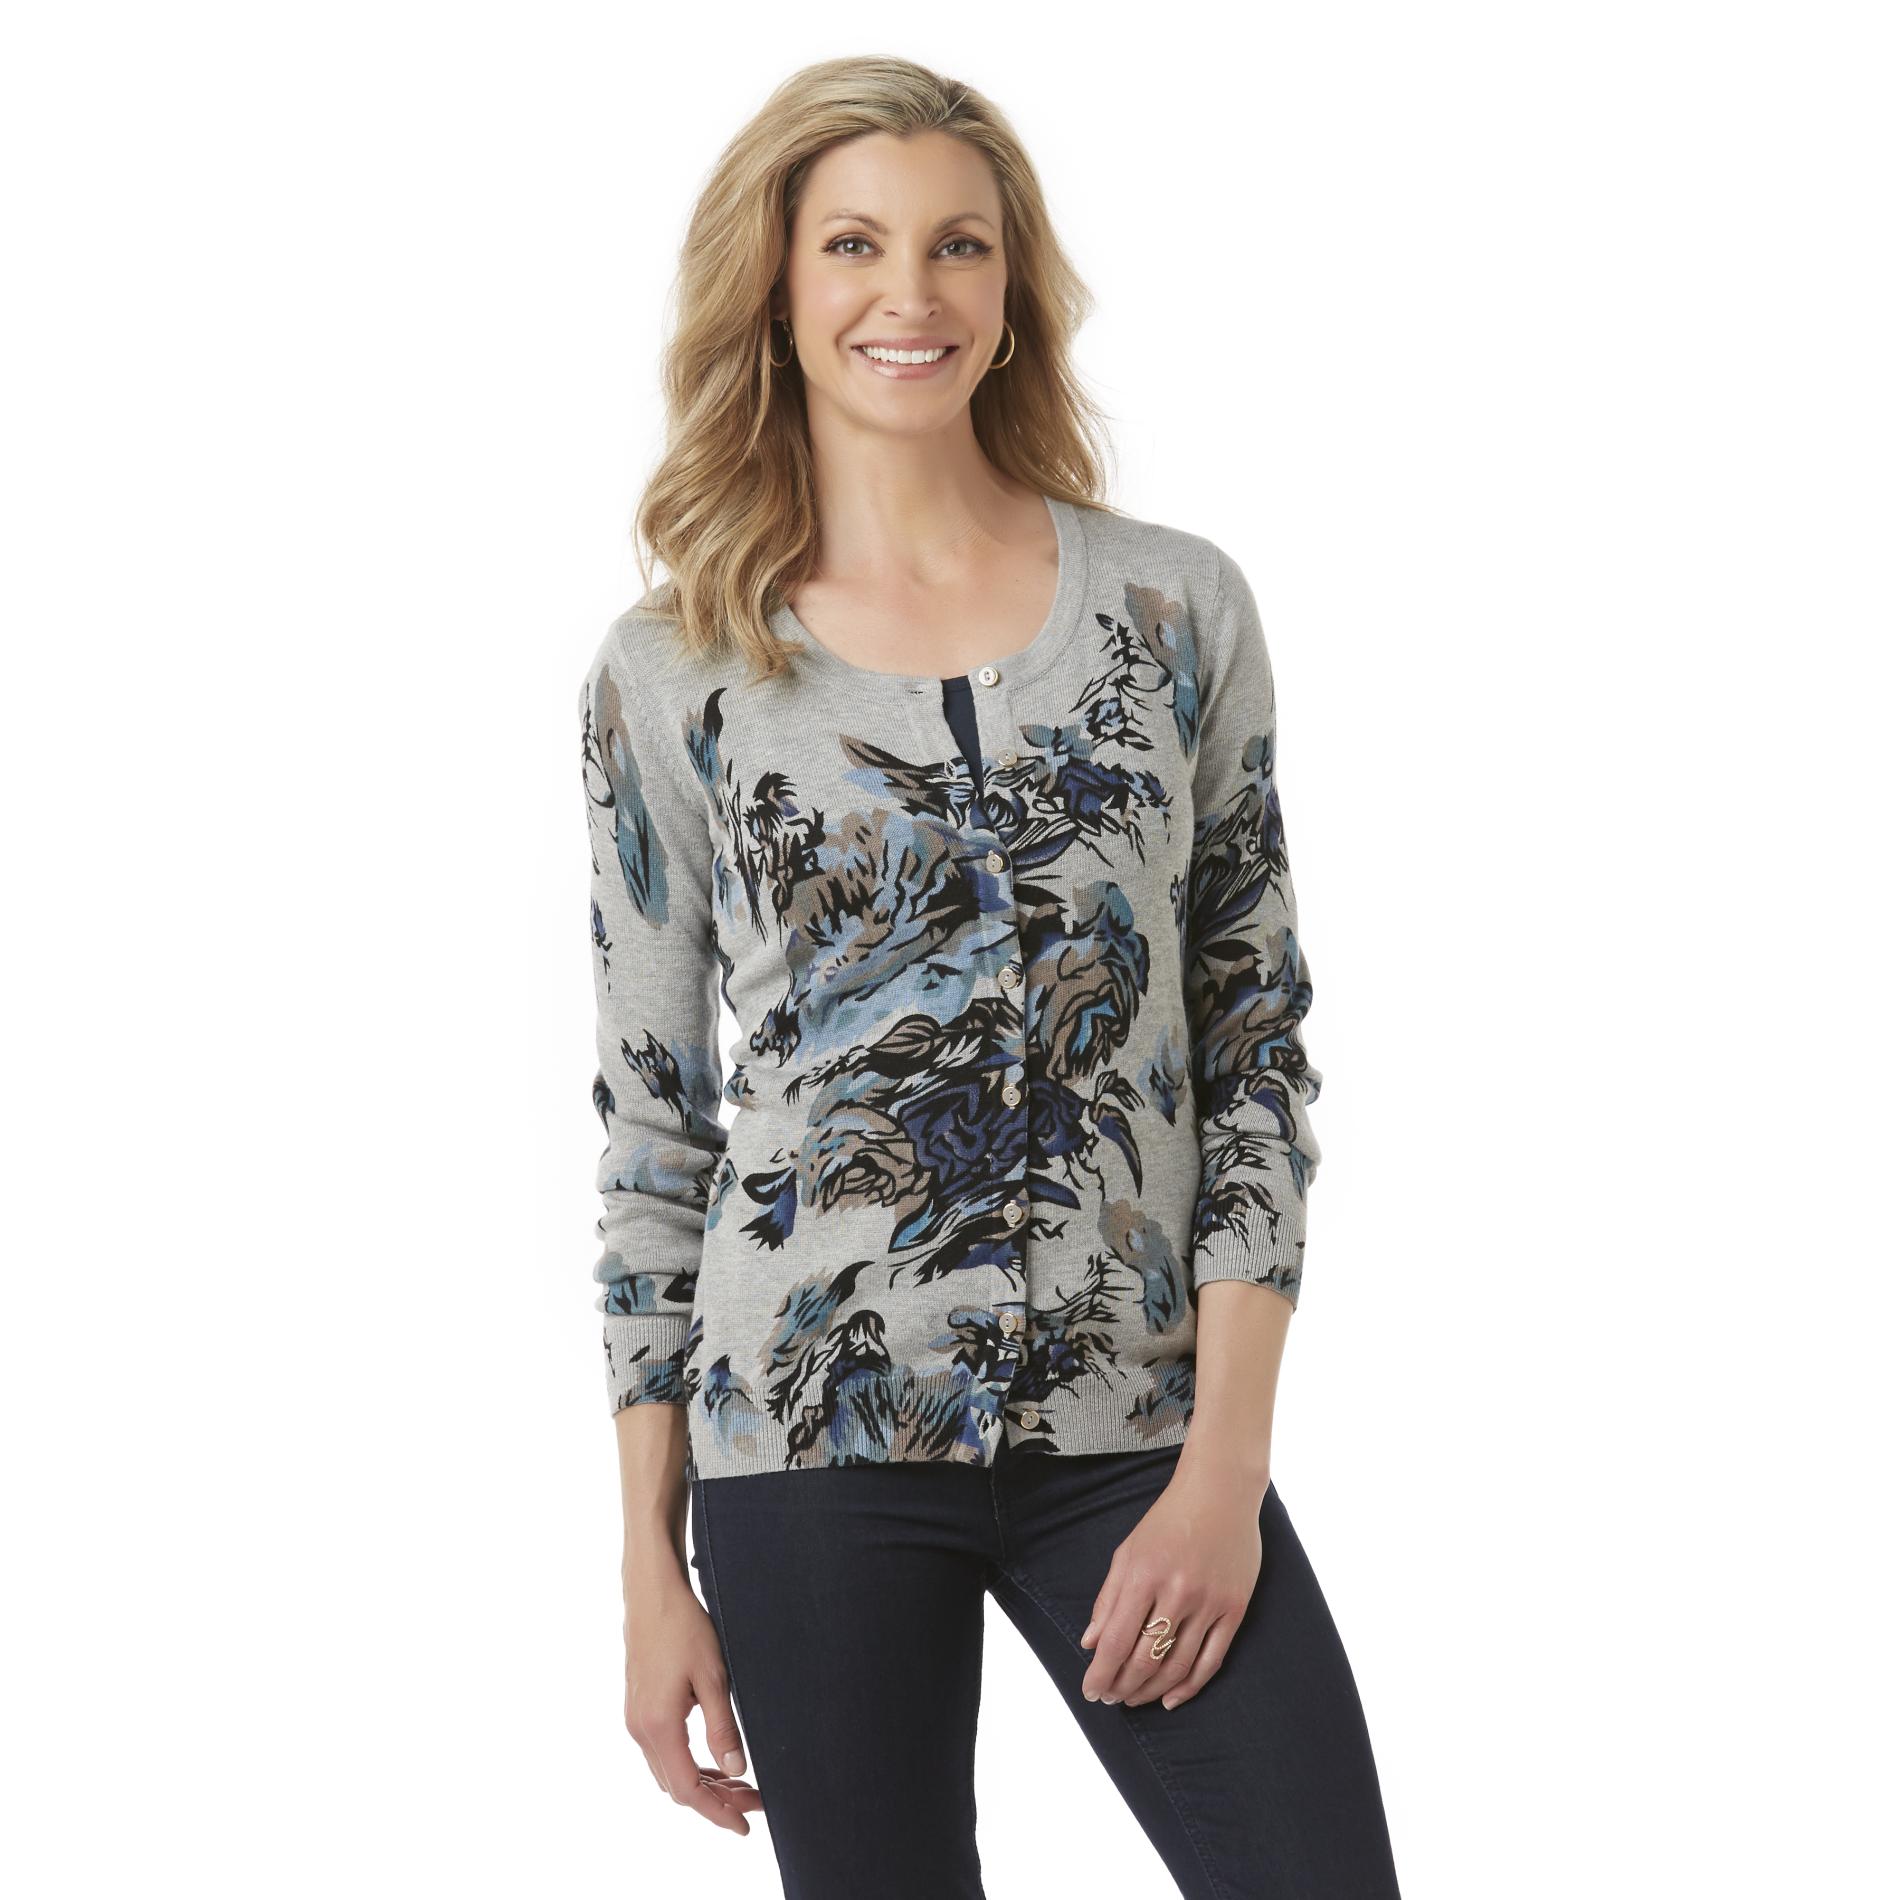 Basic Editions Women's Cardigan - Floral